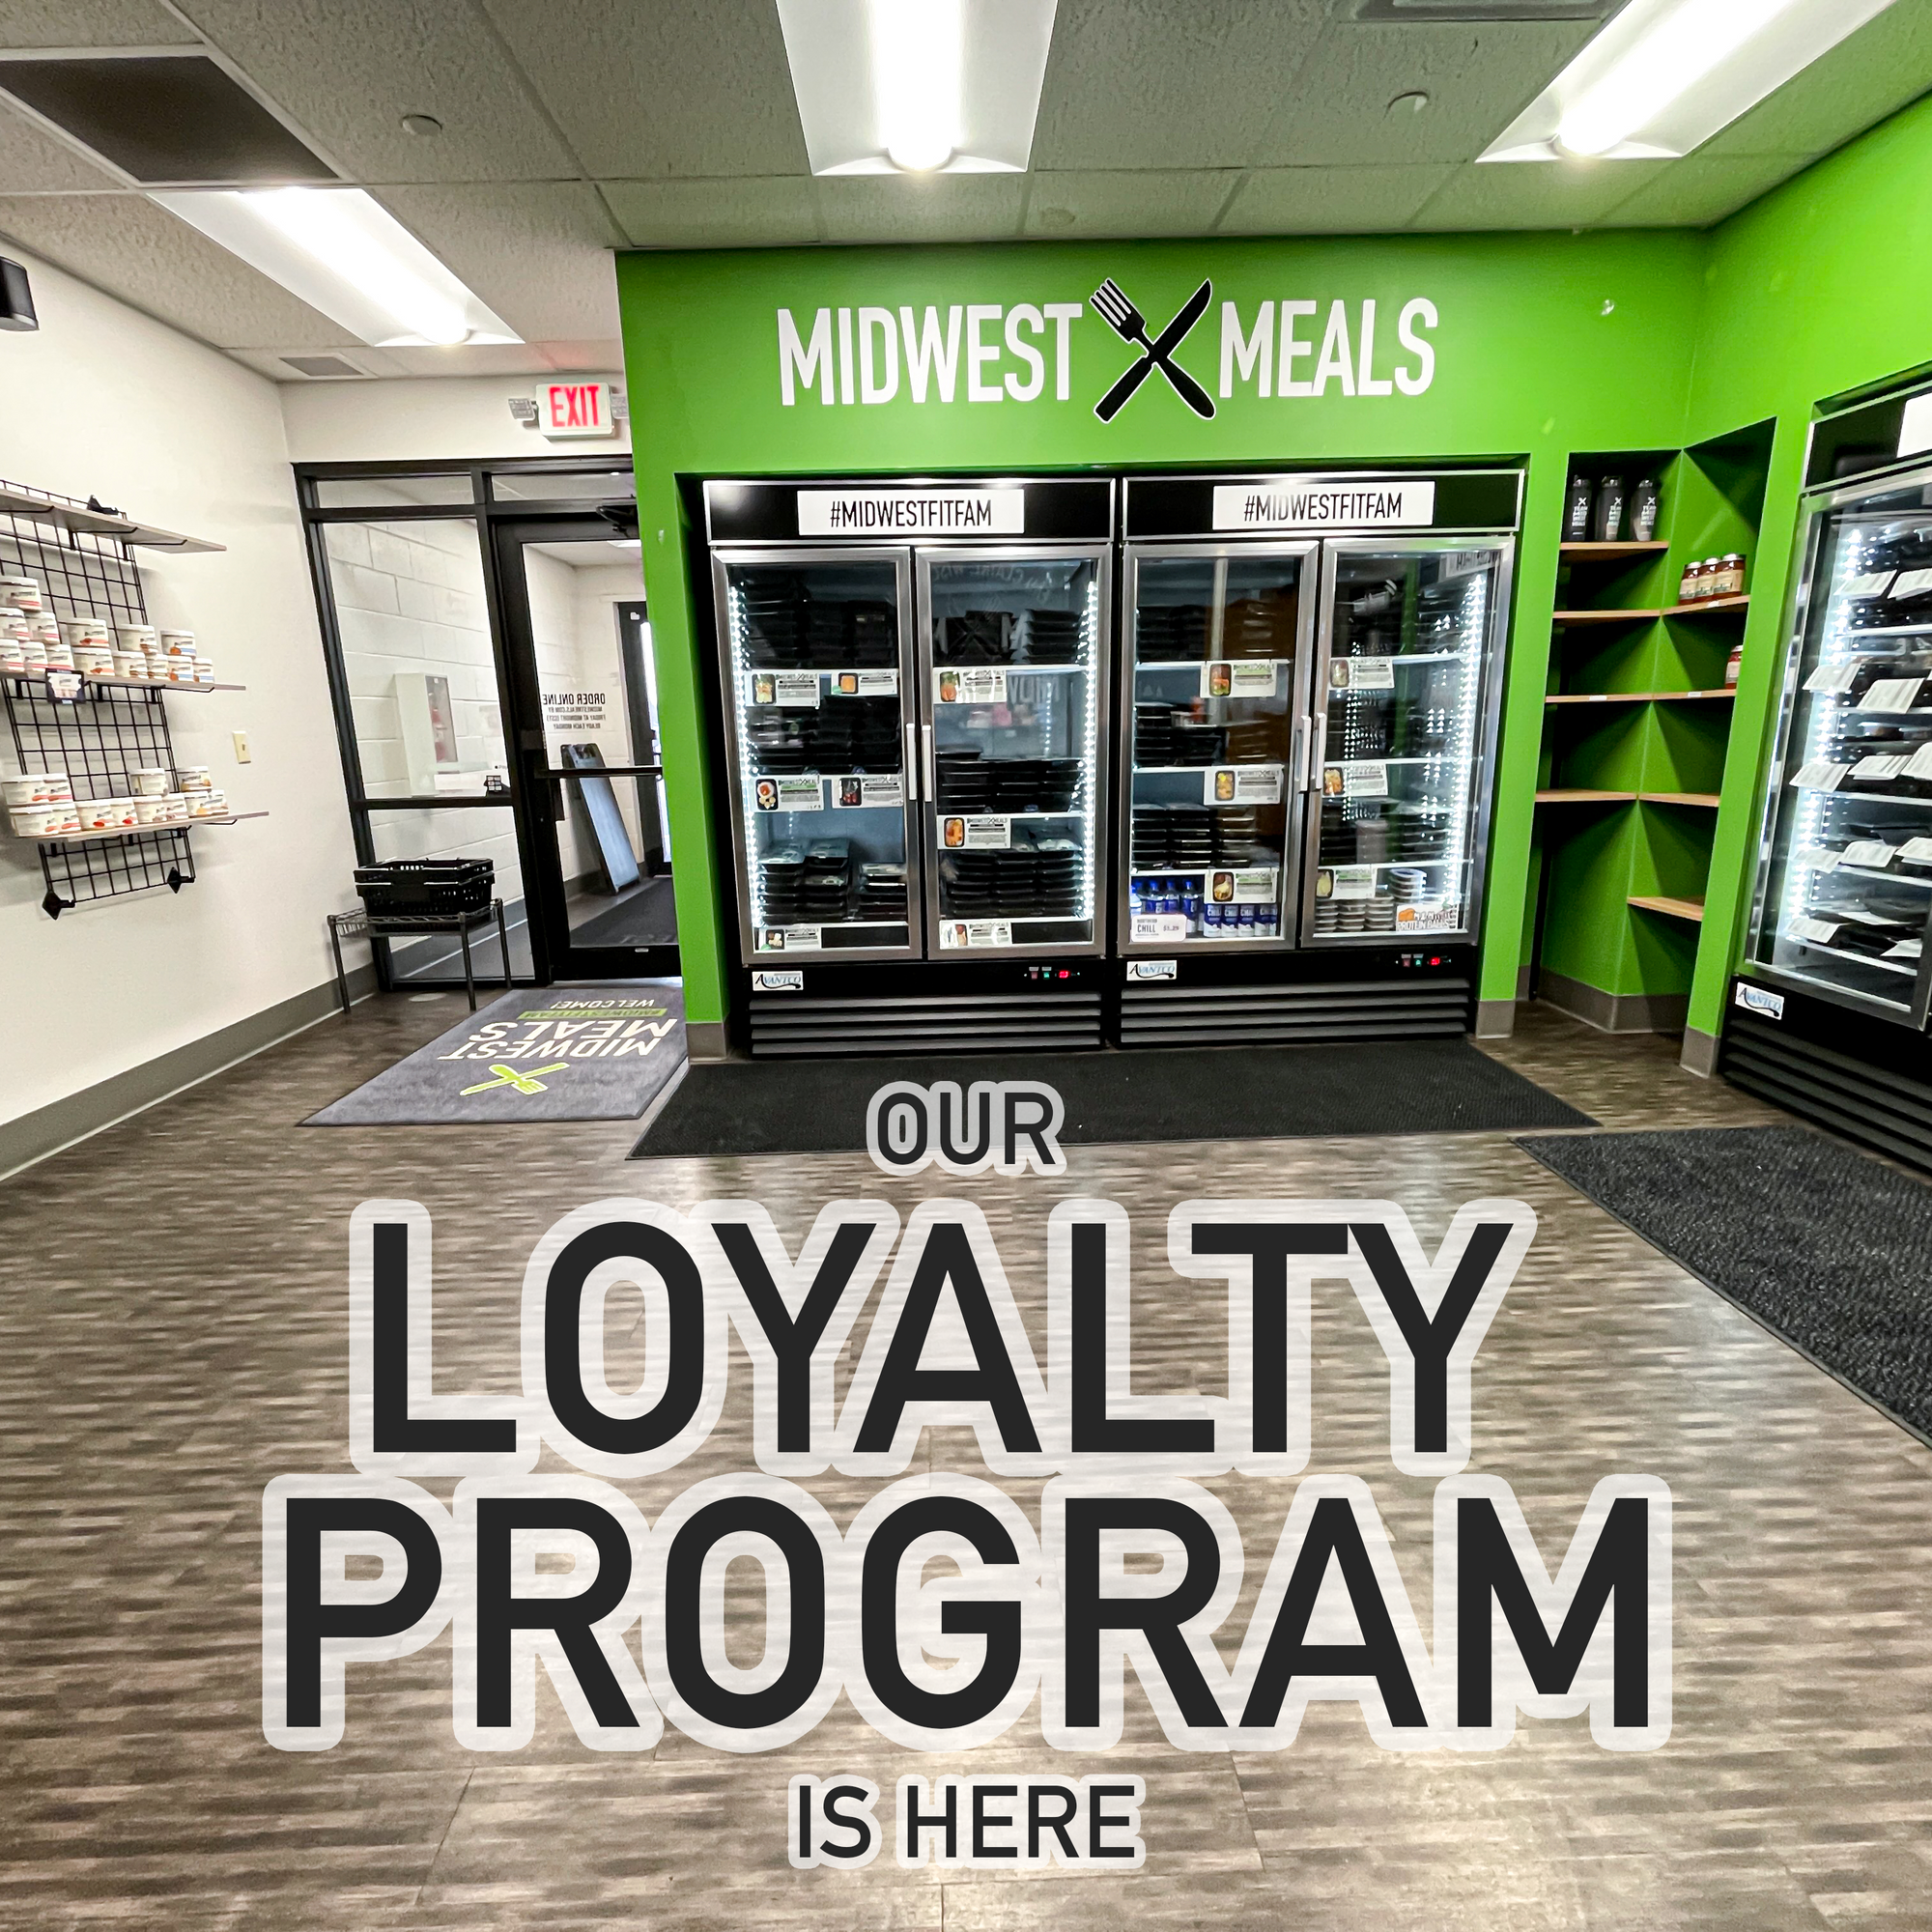 All About Our Loyalty Program!